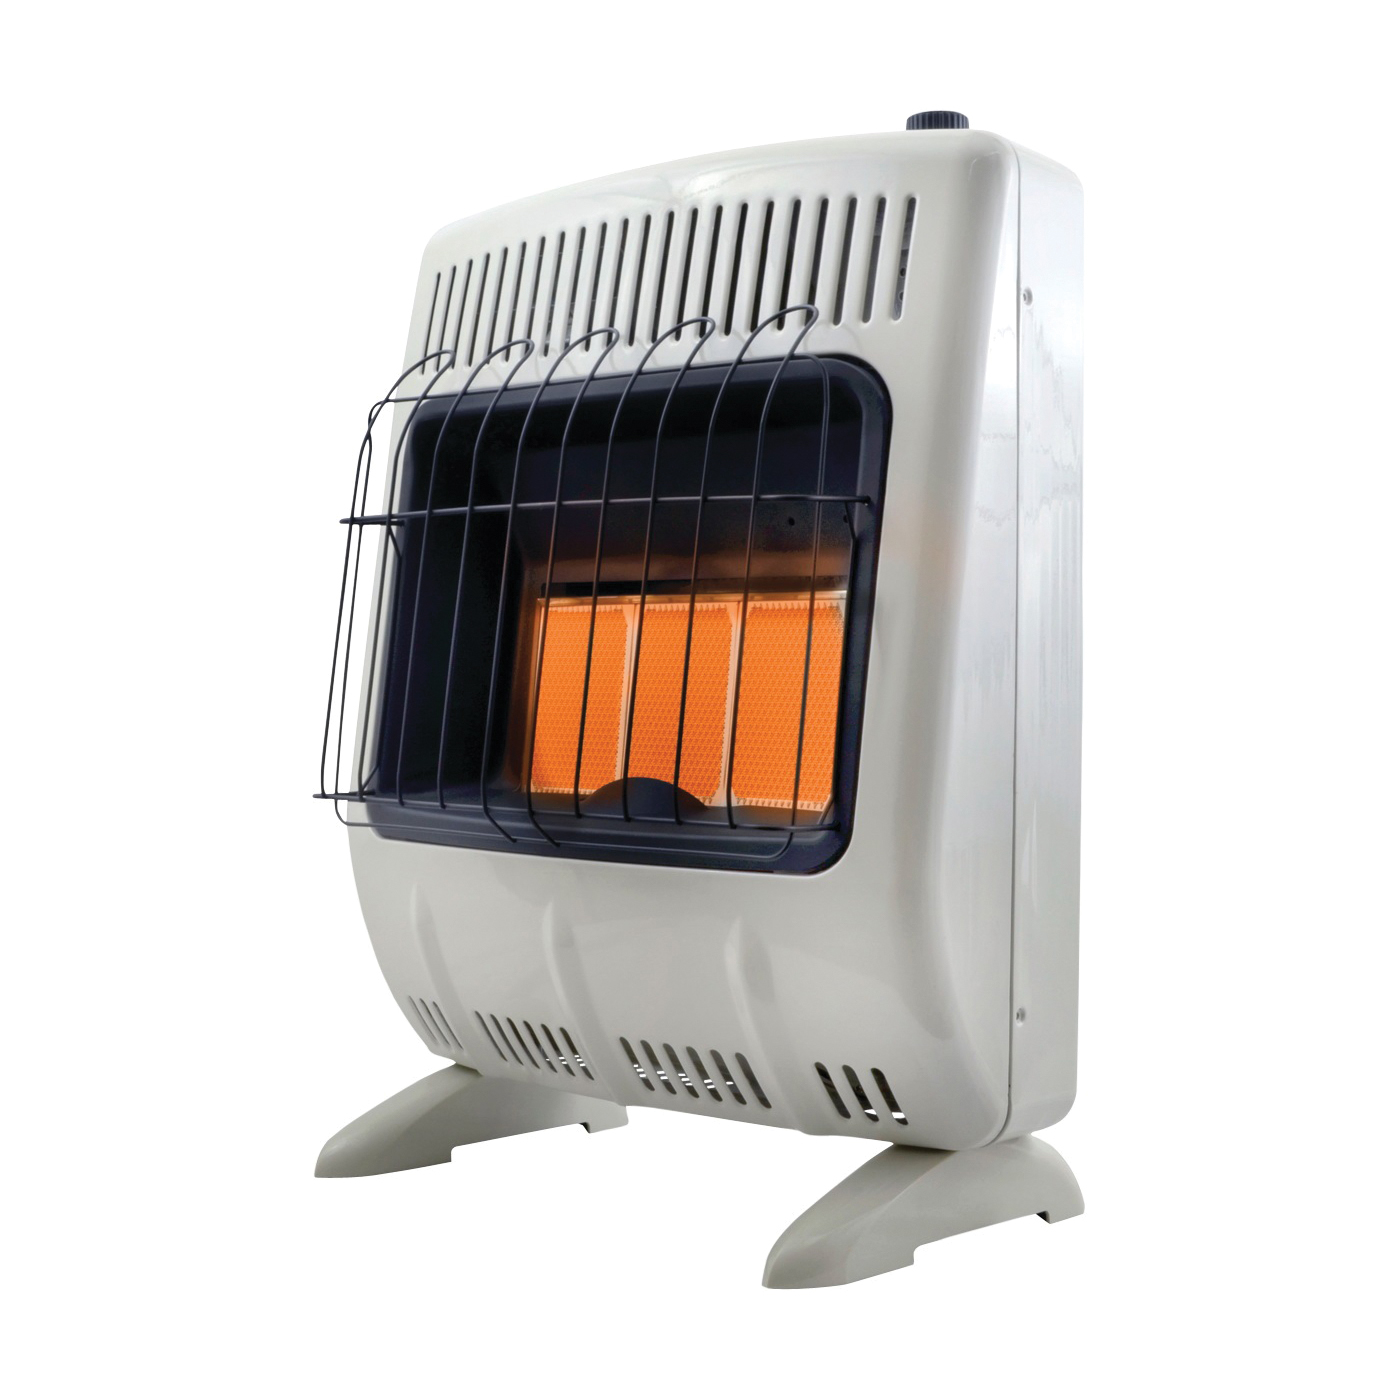 Mr. Heater F299821 Vent-Free Radiant Gas Heater, 11-1/4 in W, 27 in H, 20,000 Btu Heating, Natural Gas